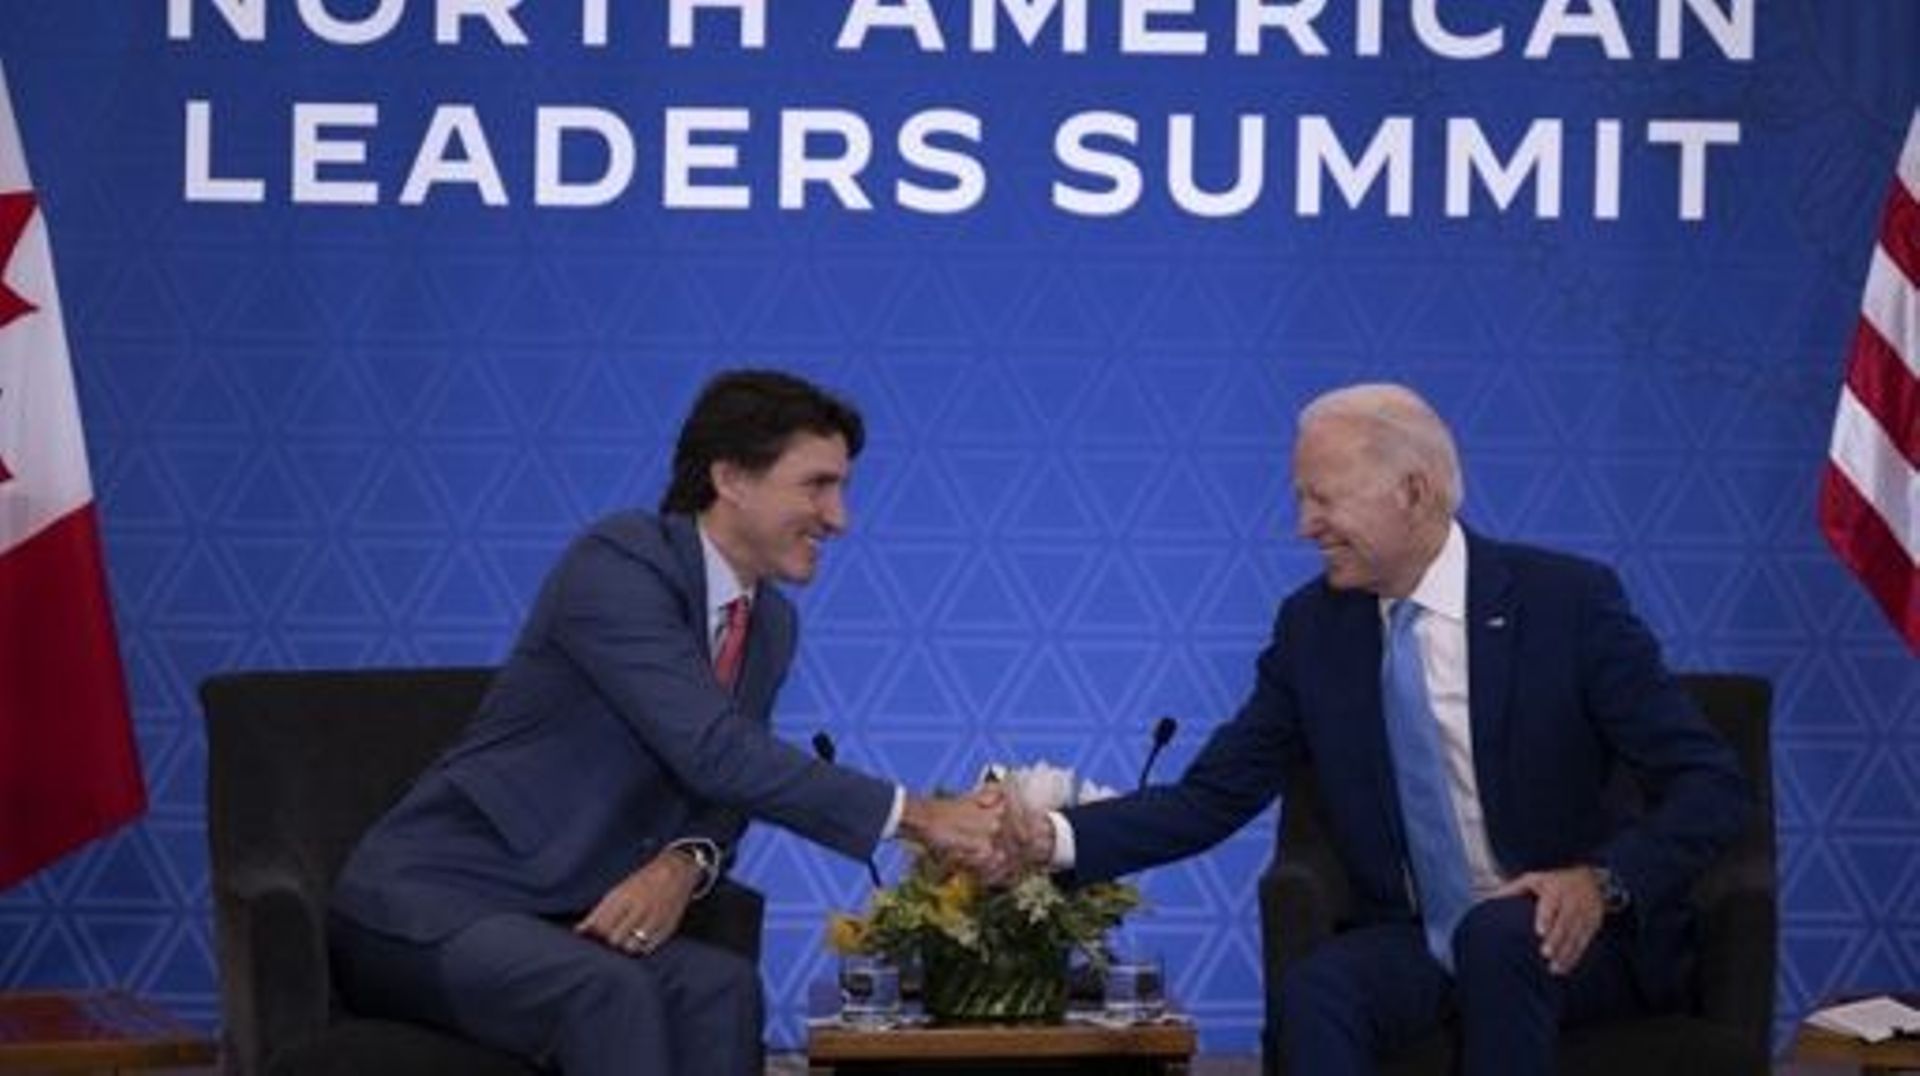 US President Joe Biden meets with Canadian Prime Minister Justin Trudeau in Mexico City, on January 10, 2023, during the North American Leaders' Summit. Jim WATSON / AFP